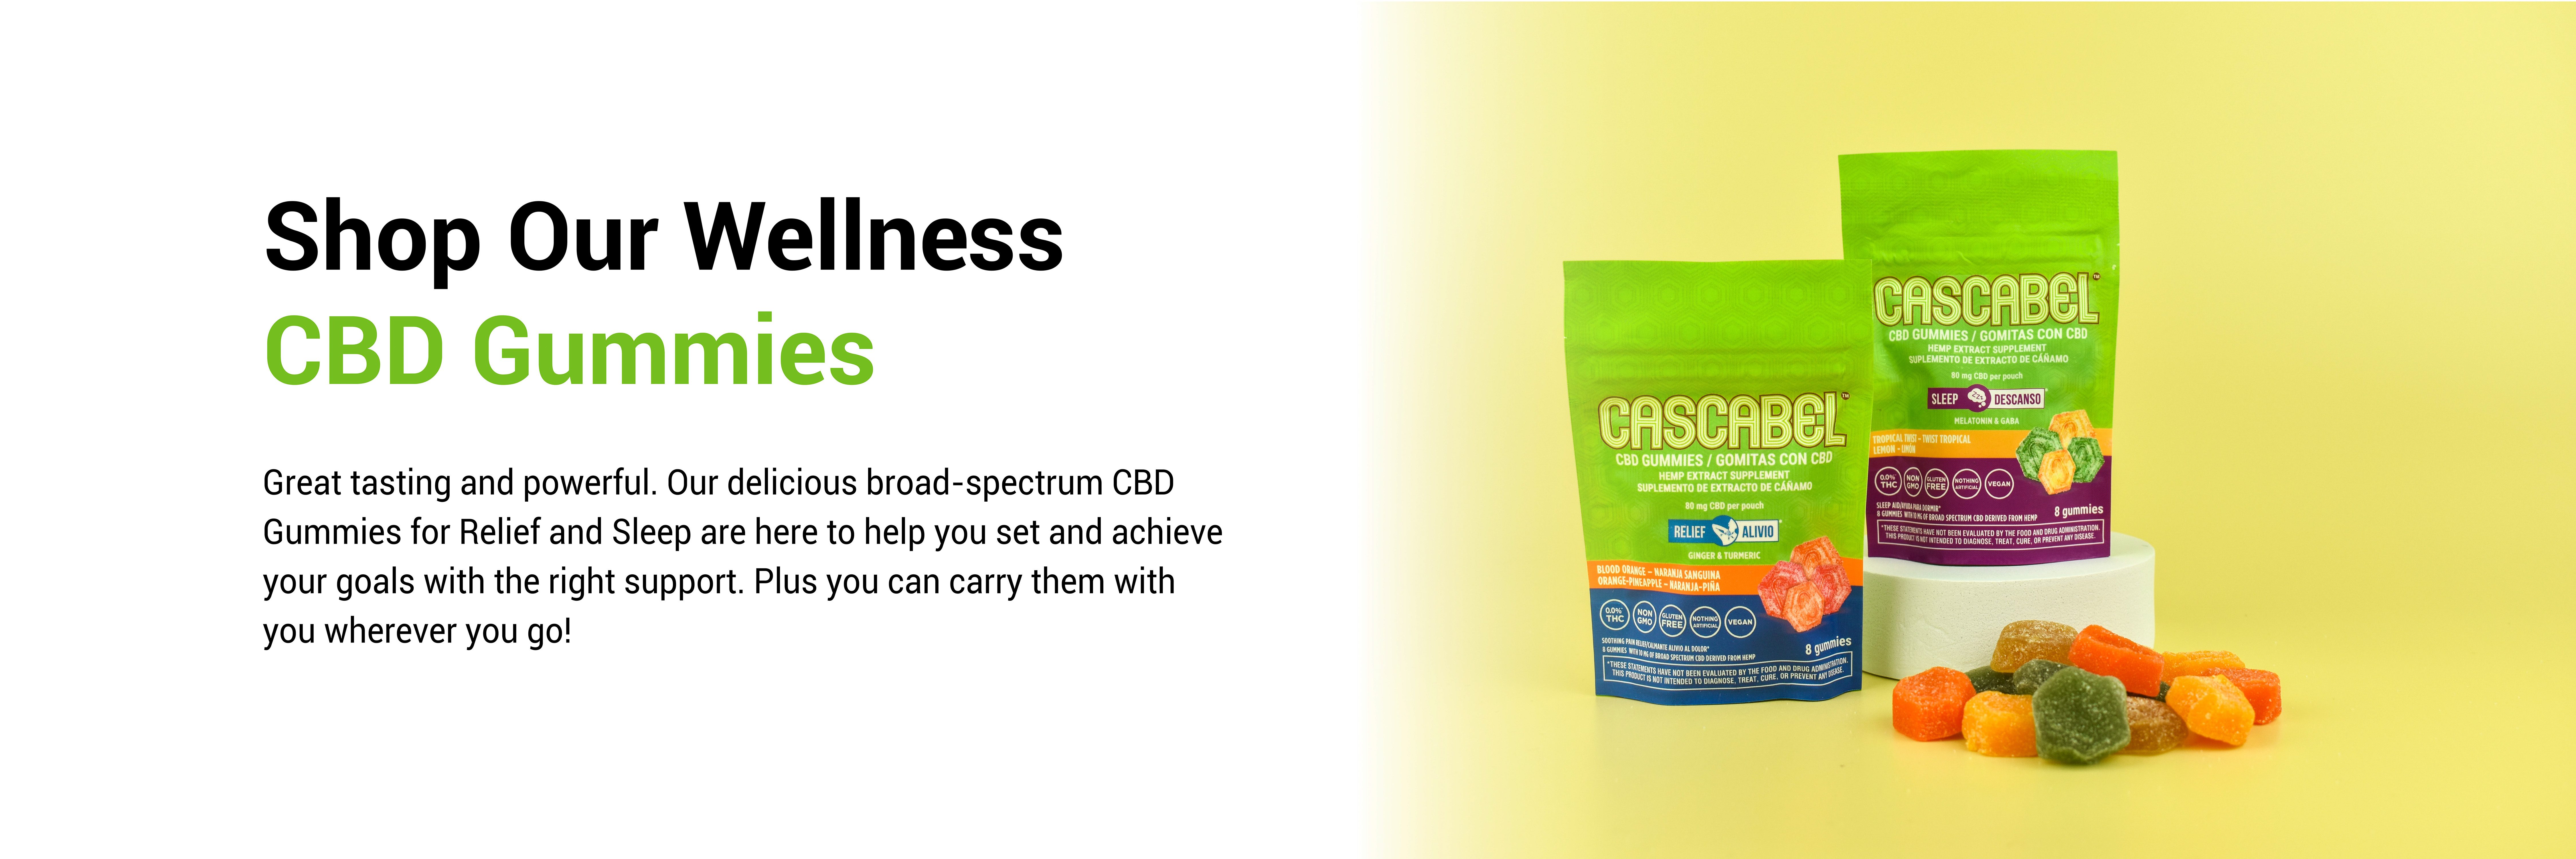 Shop Our Wellness CBD Gummies | Cascabel™ | Relief & Sleep | Daily Supplement | GMP Compliant | Locally Sourced | Natural Ingredients